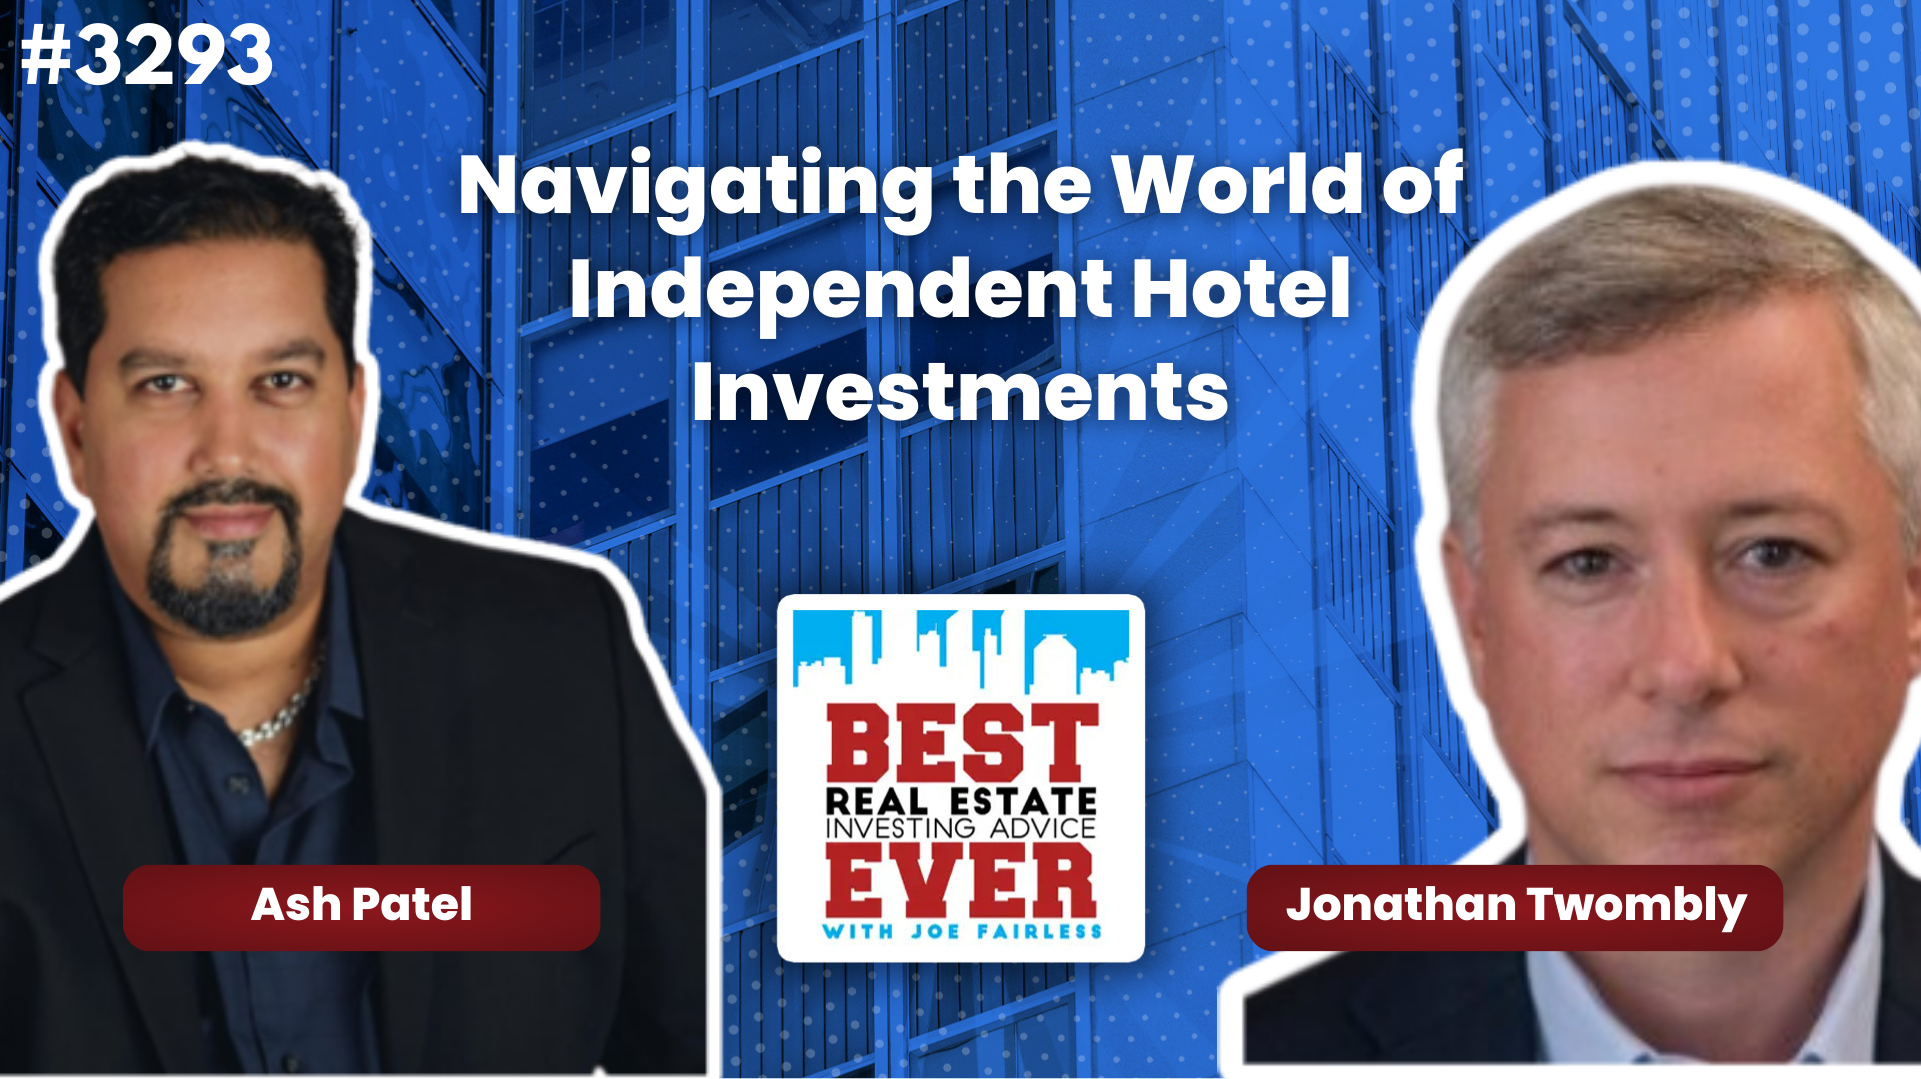 JF3293: Jonathan Twombly - Navigating the World of Independent Hotel Investments